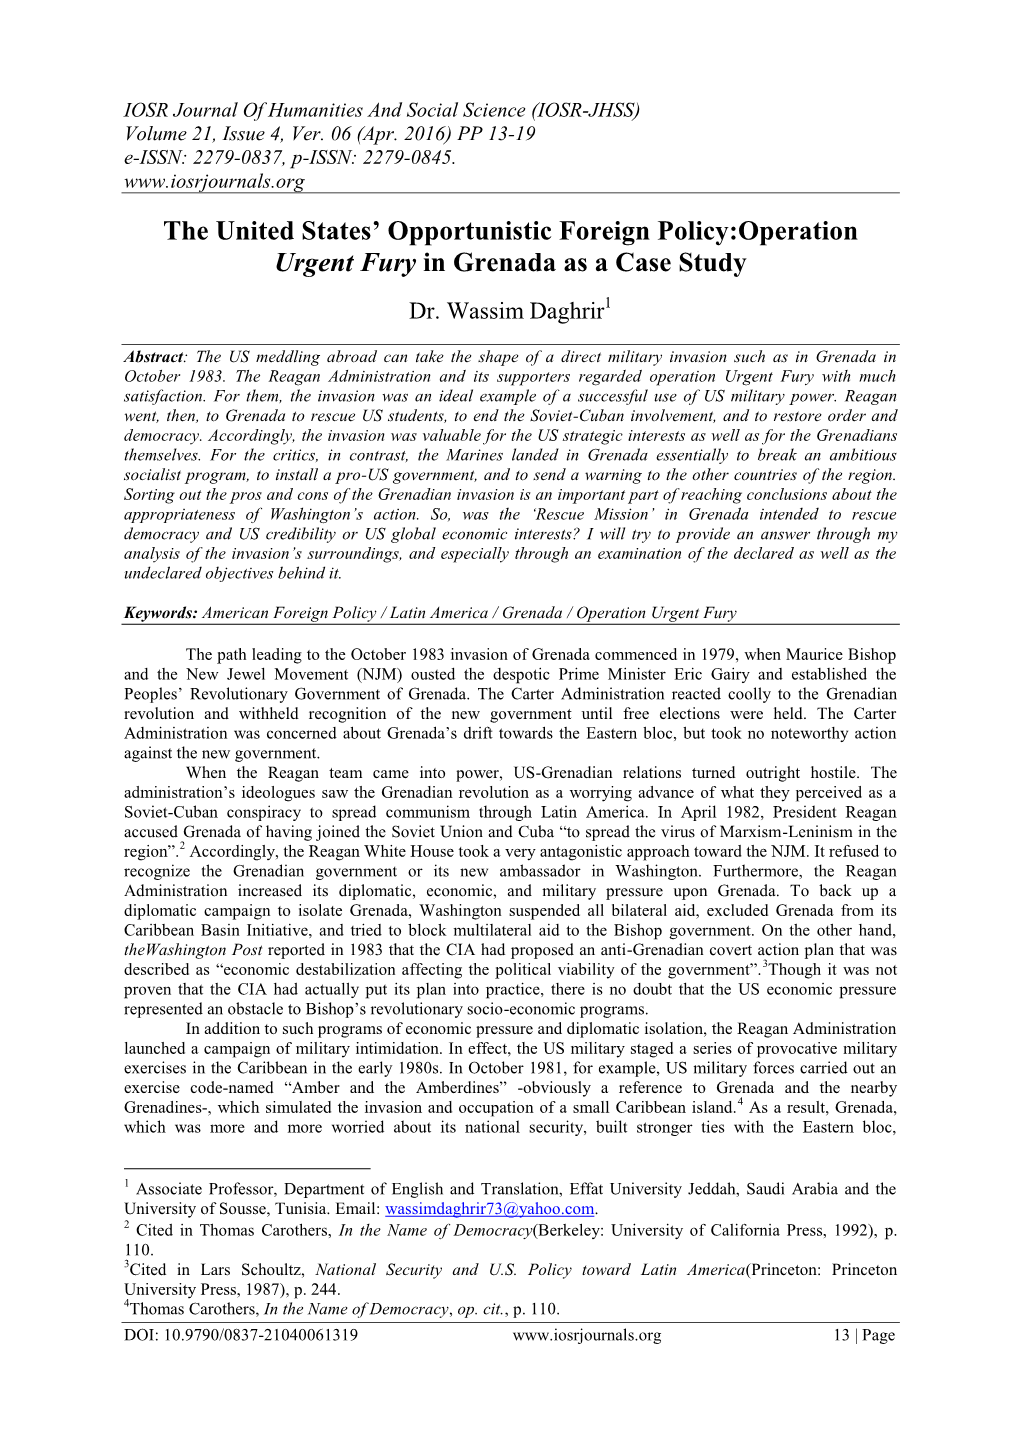 The United States' Opportunistic Foreign Policy:Operation Urgent Fury in Grenada As a Case Study